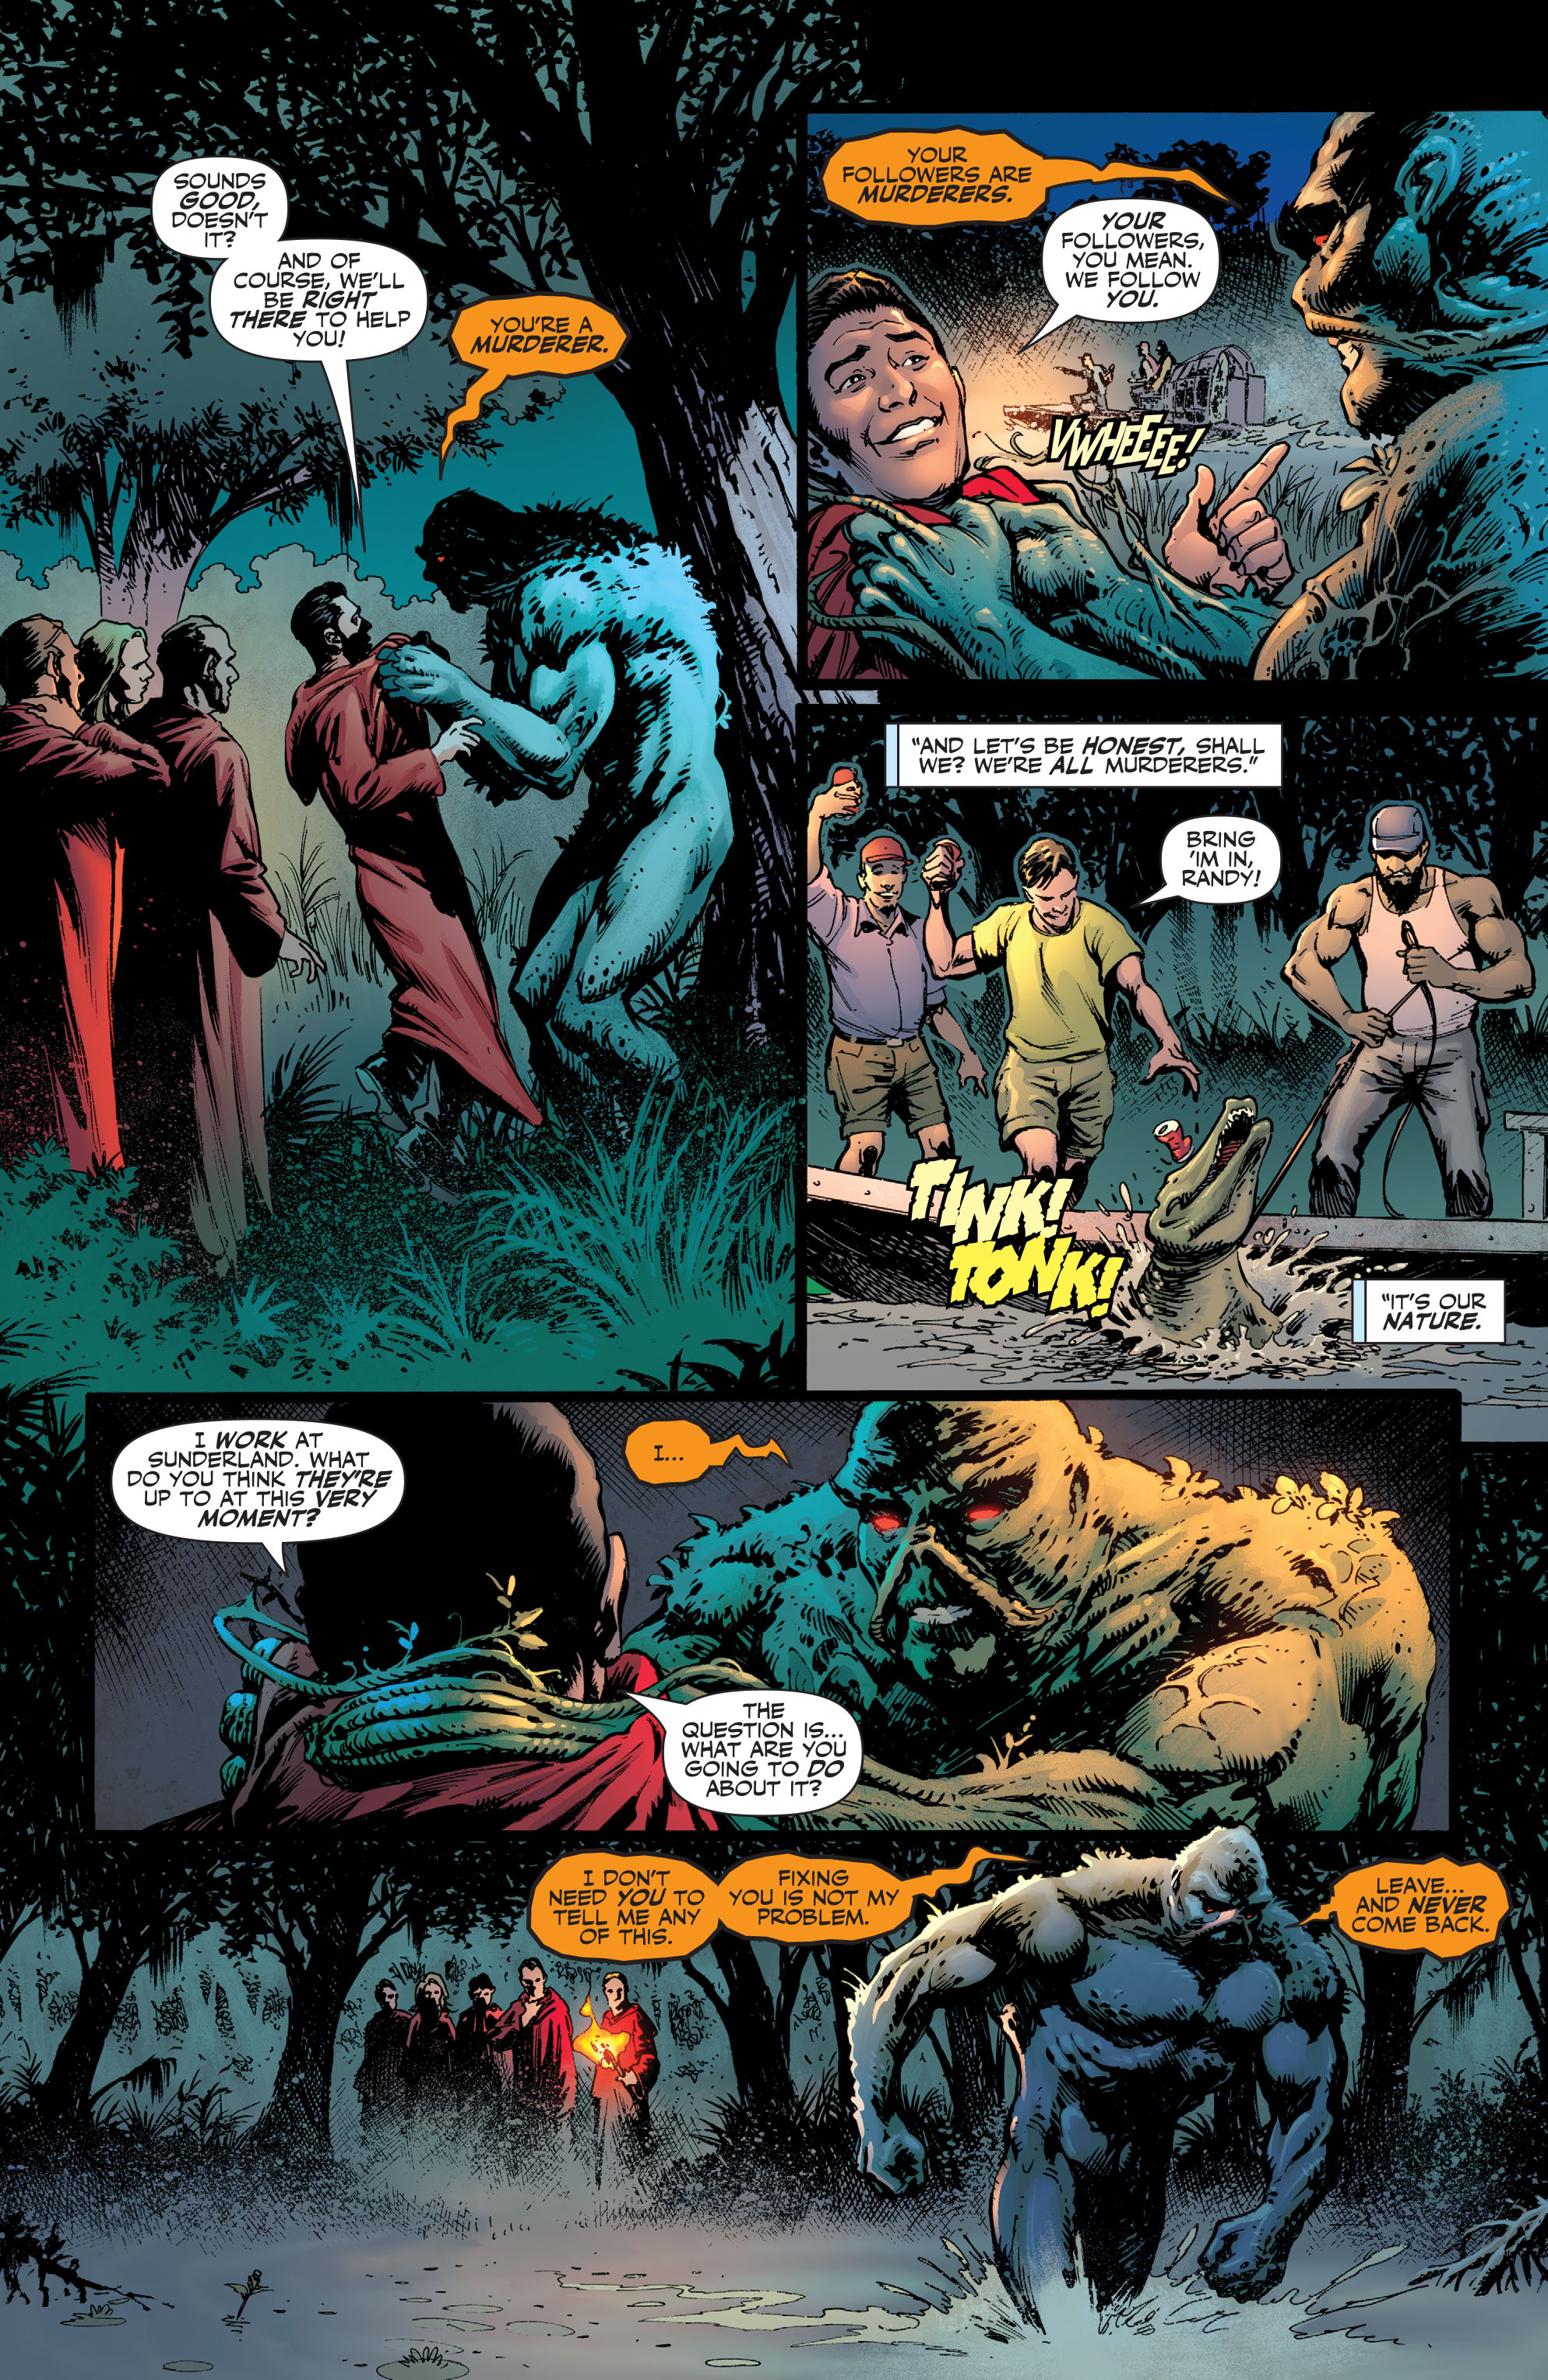 Swamp Thing: New Roots (2020-): Chapter 5 - Page 4